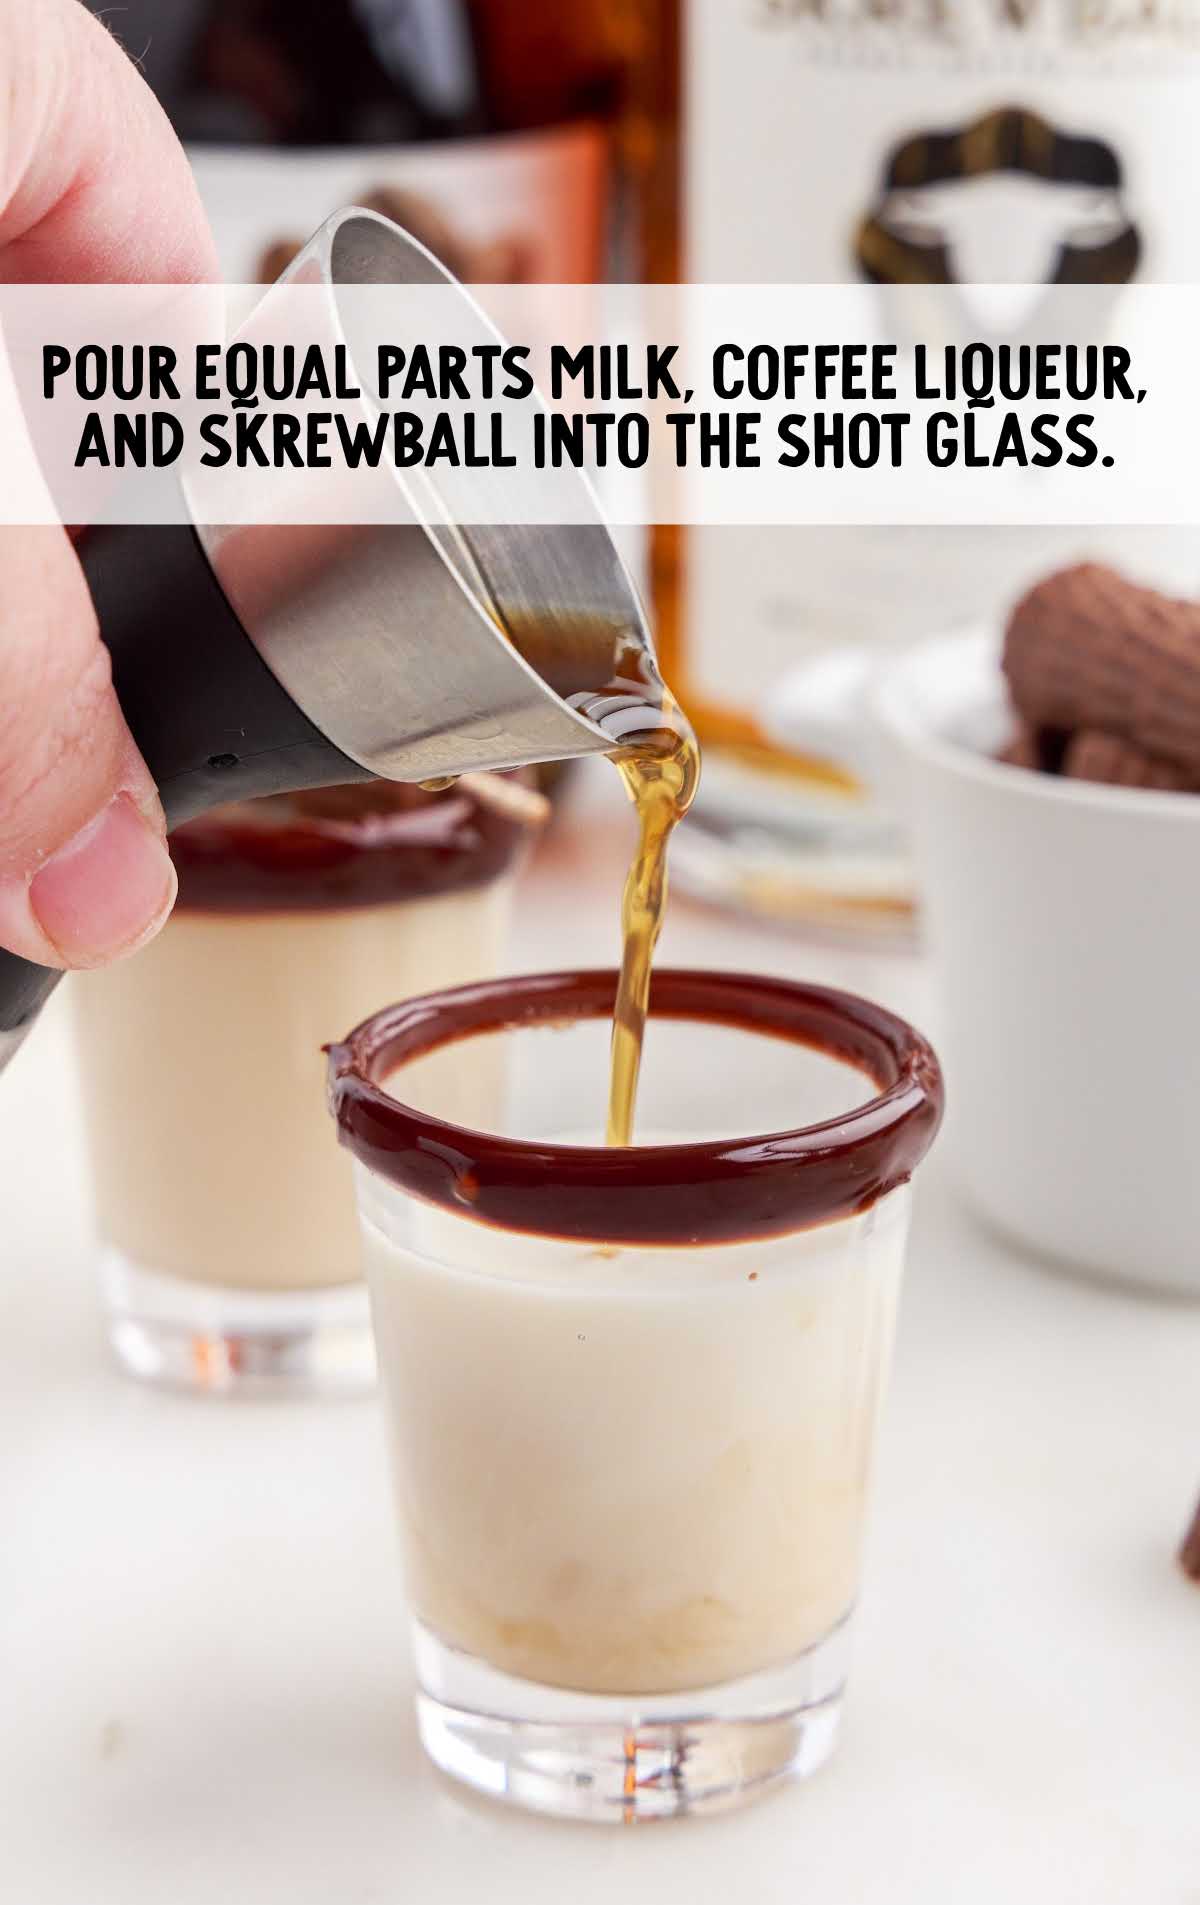 milk, coffee liqueur, and skrewball poured into the shot glass